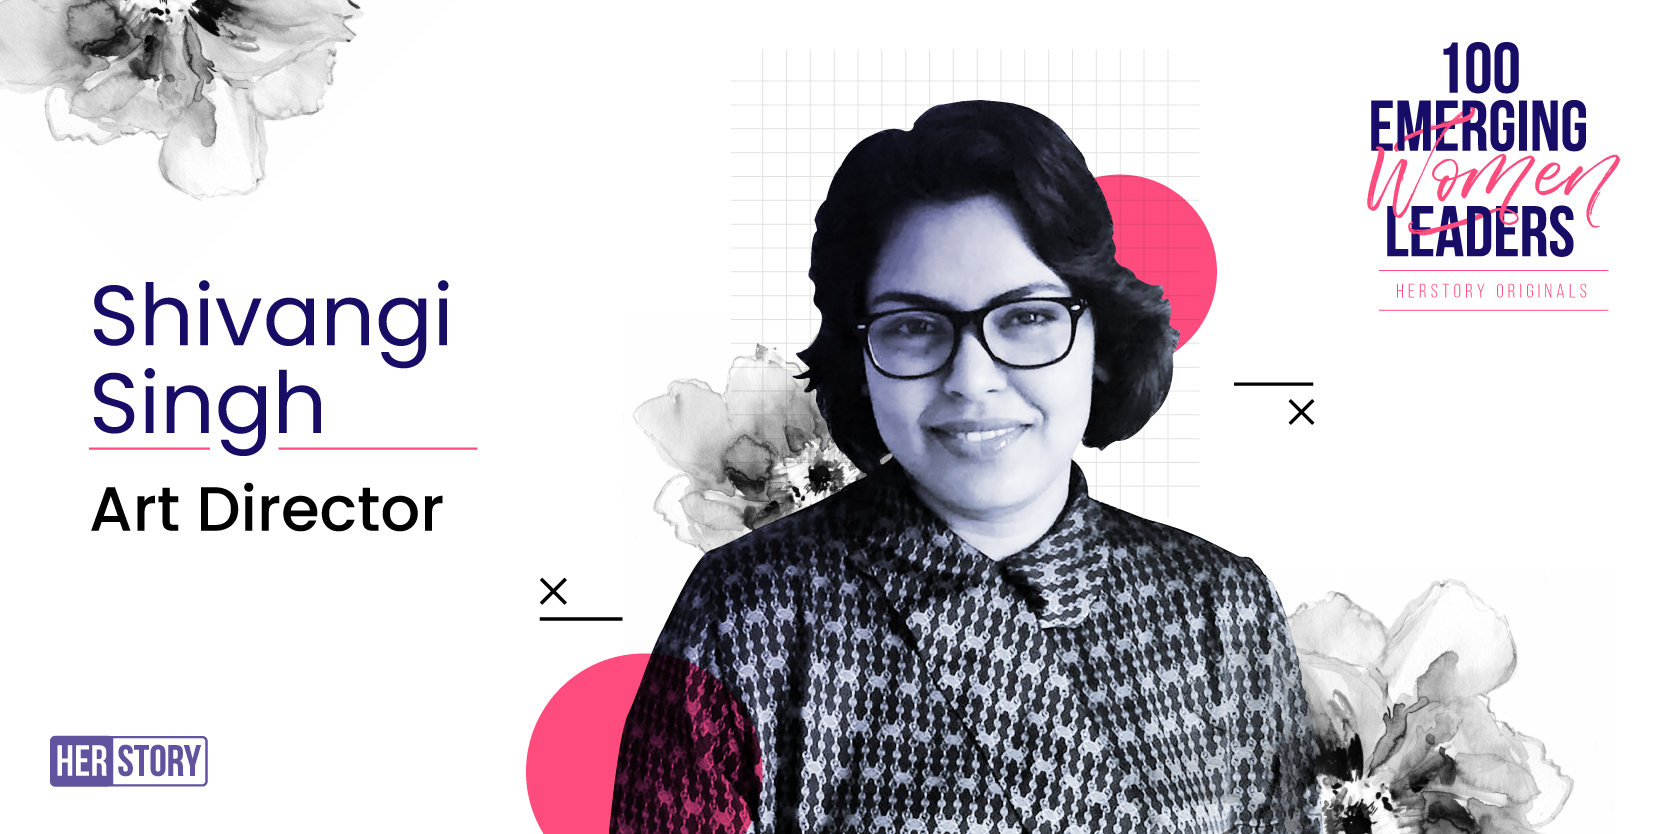 [100 Emerging Women Leaders] From Lucknow to Los Angeles, how Shivangi Singh found her calling in art direction 